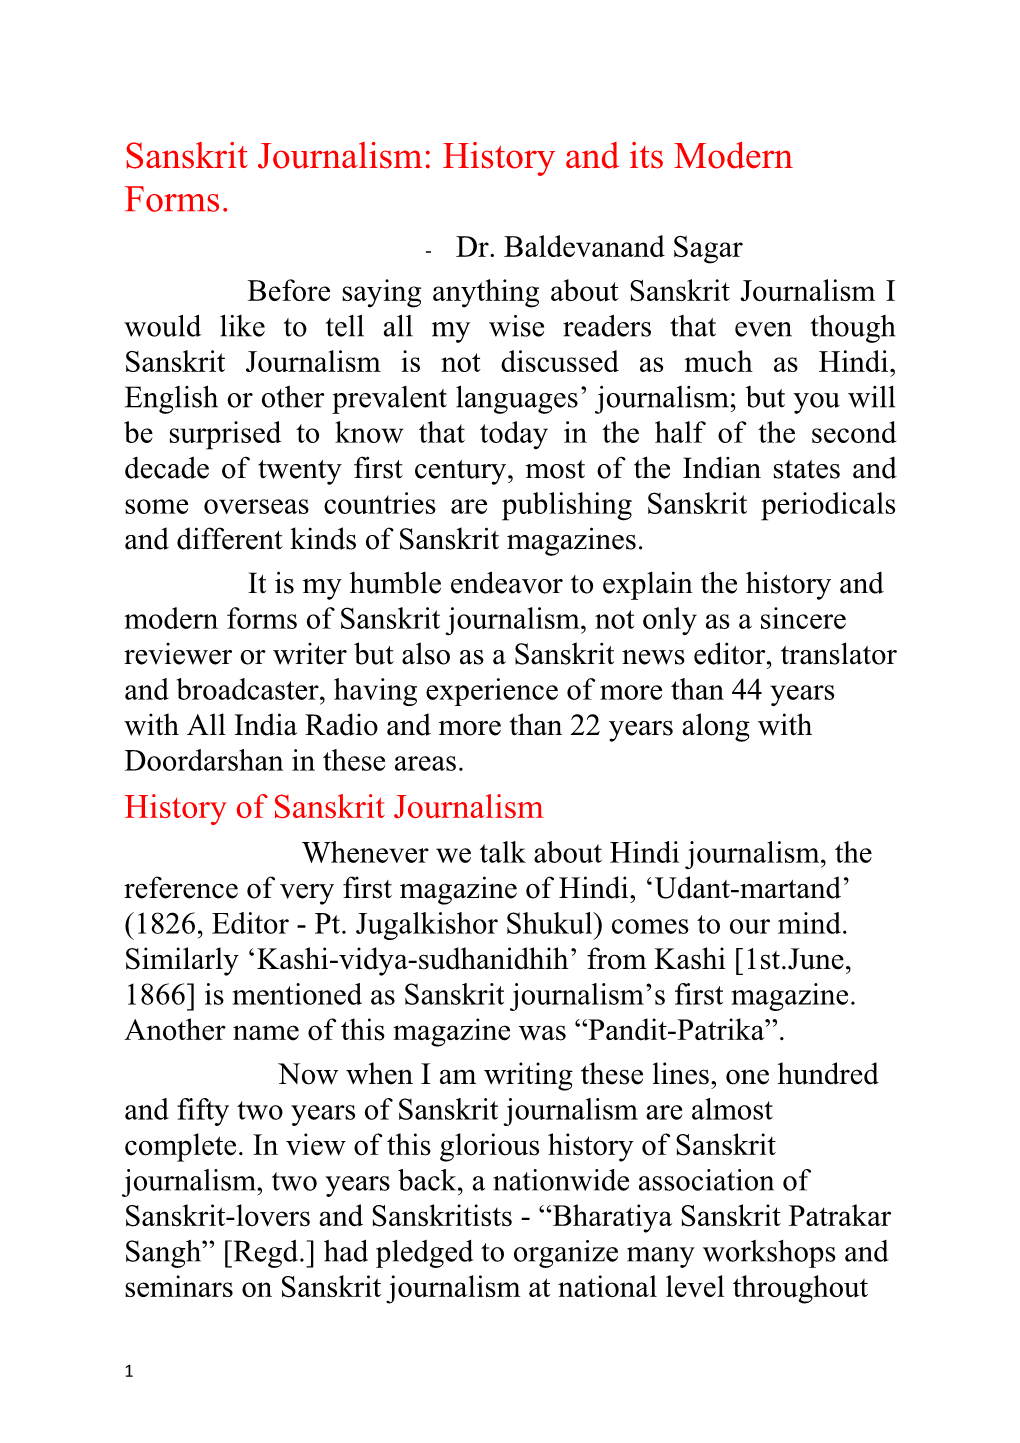 Sanskrit Journalism: History and Its Modern Forms